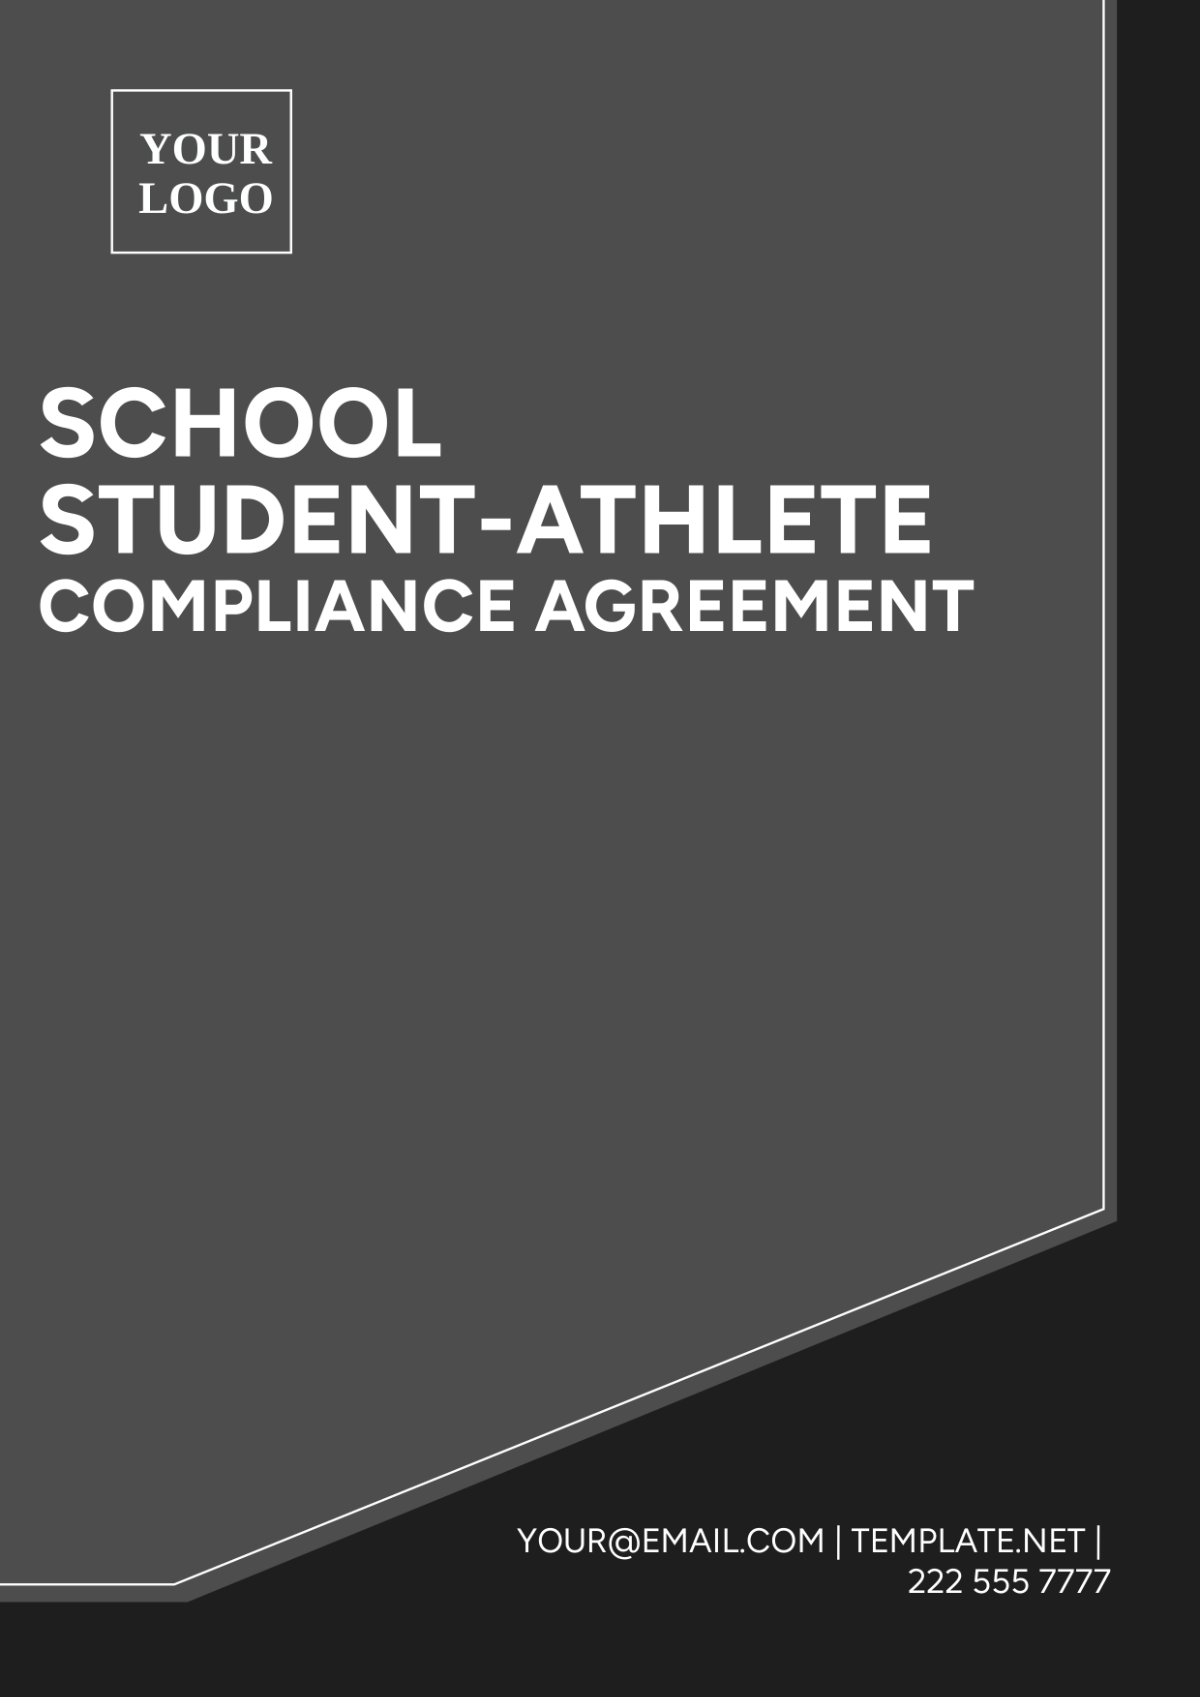 School Student-Athlete Compliance Agreement Template